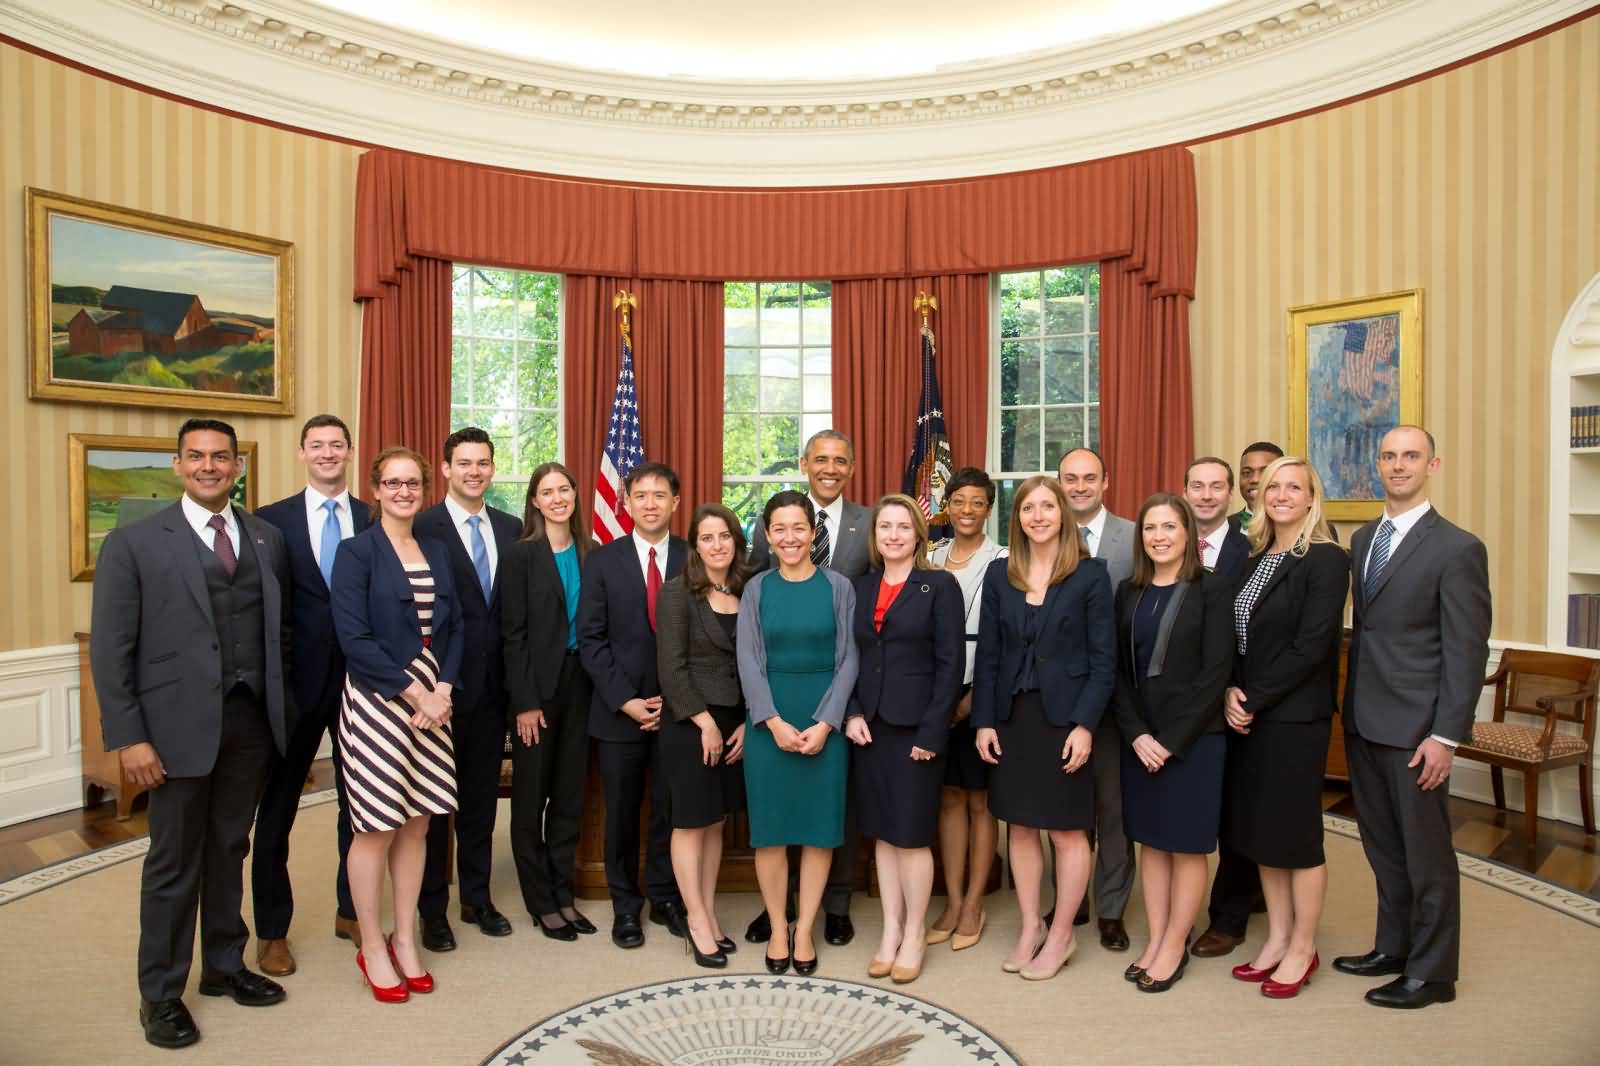 President Barack Obama Poses For A Group Photo In The Oval Office White House